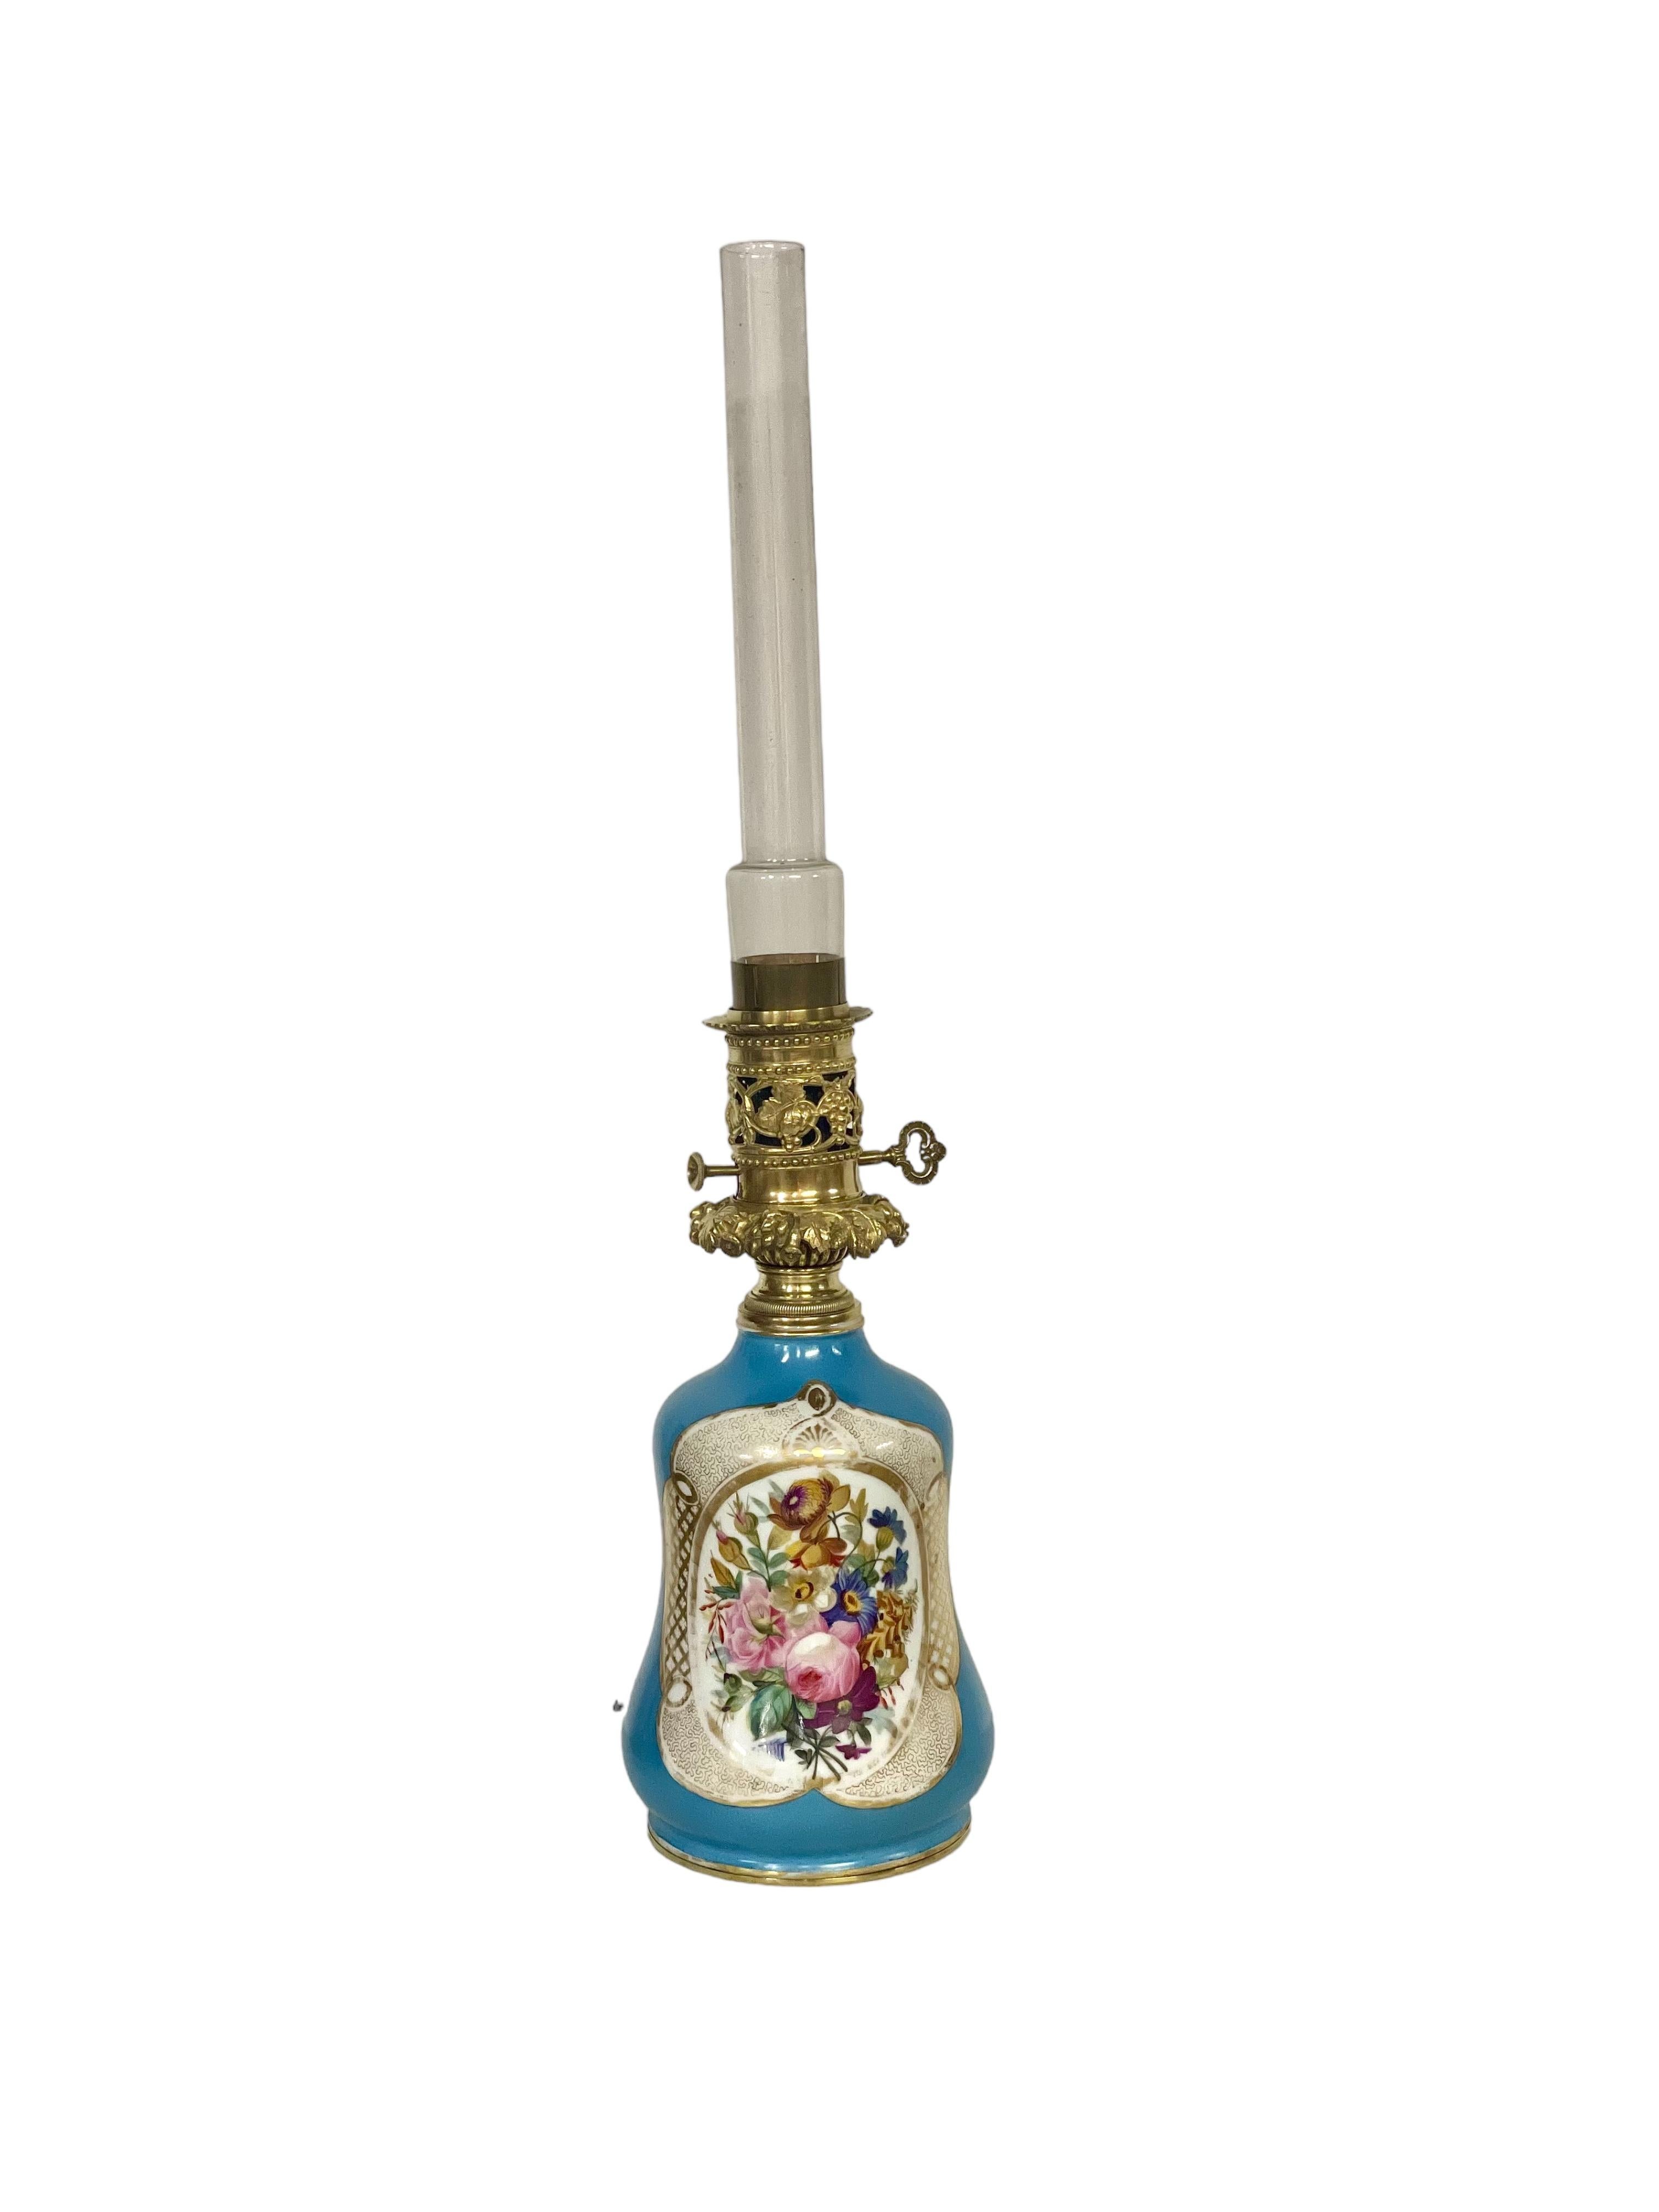 A charming antique bronze and Porcelain de Paris oil lamp with its original cylindrical glass chimney. The lamp base is beautifully hand-painted with a cartouche of polychrome flowers on a striking lapis blue background, and is ornamented with